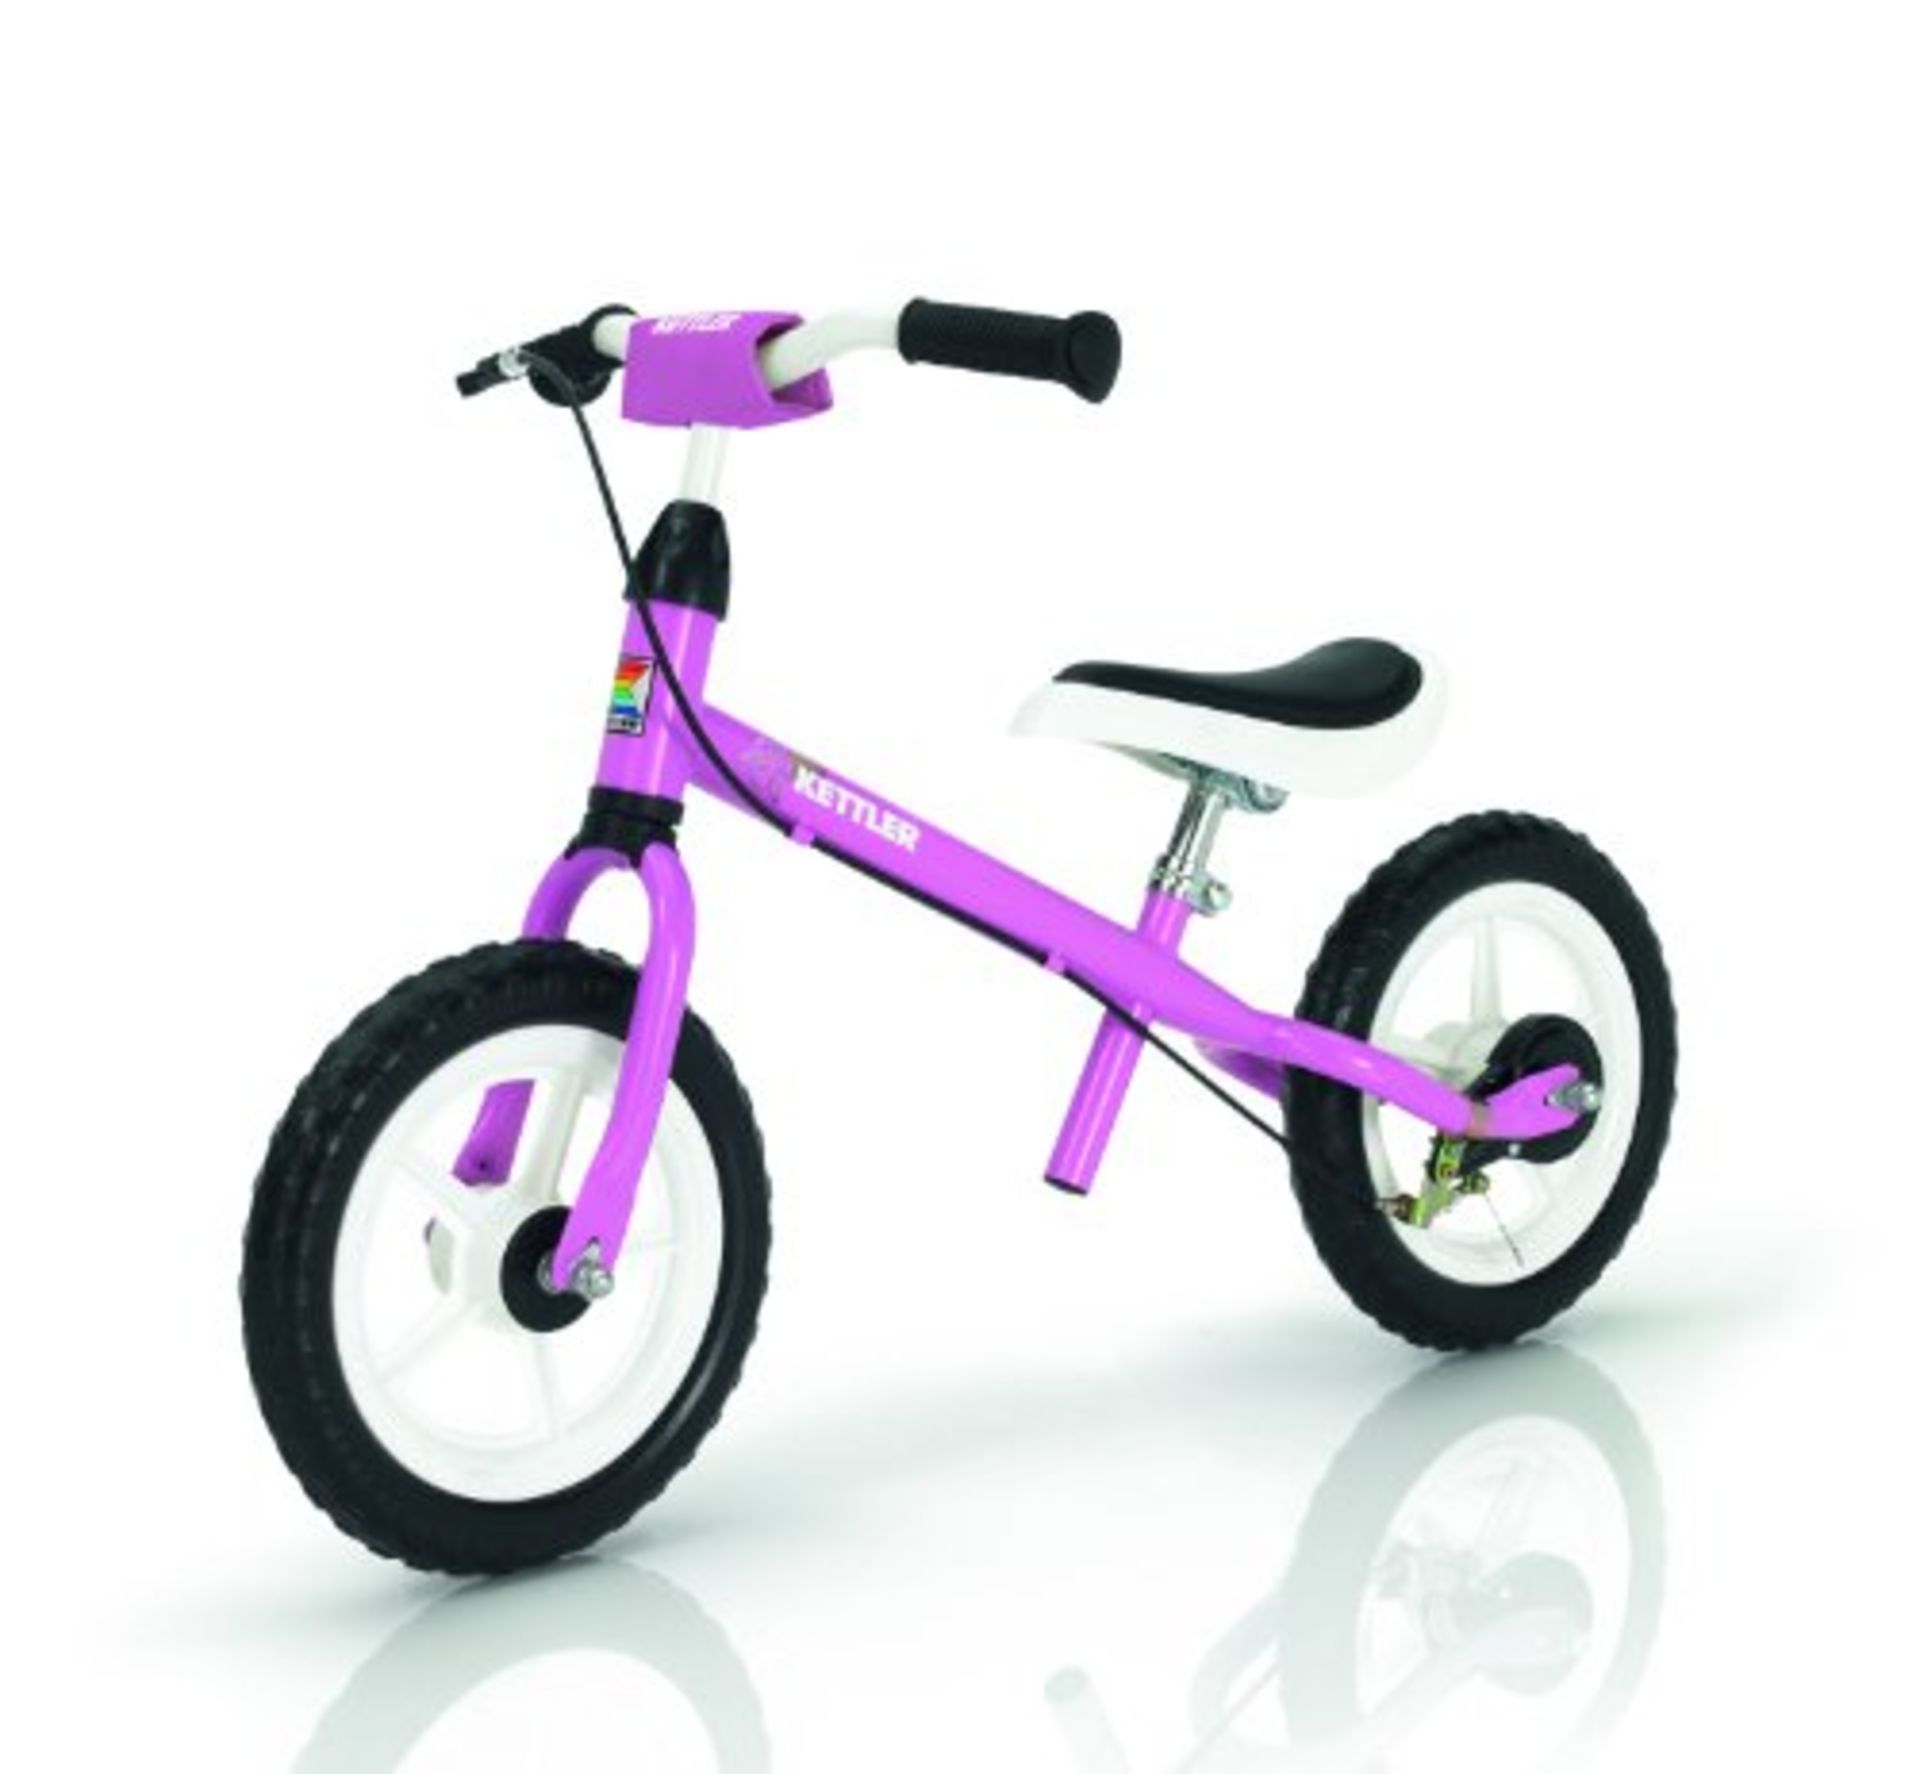 1 BOXED KETTLER SPEEDY 12.5" BIKE IN PINK 2 TO 5 YEARS / RRP £60.00 (VIEWING HIGHLY RECOMMENDED)